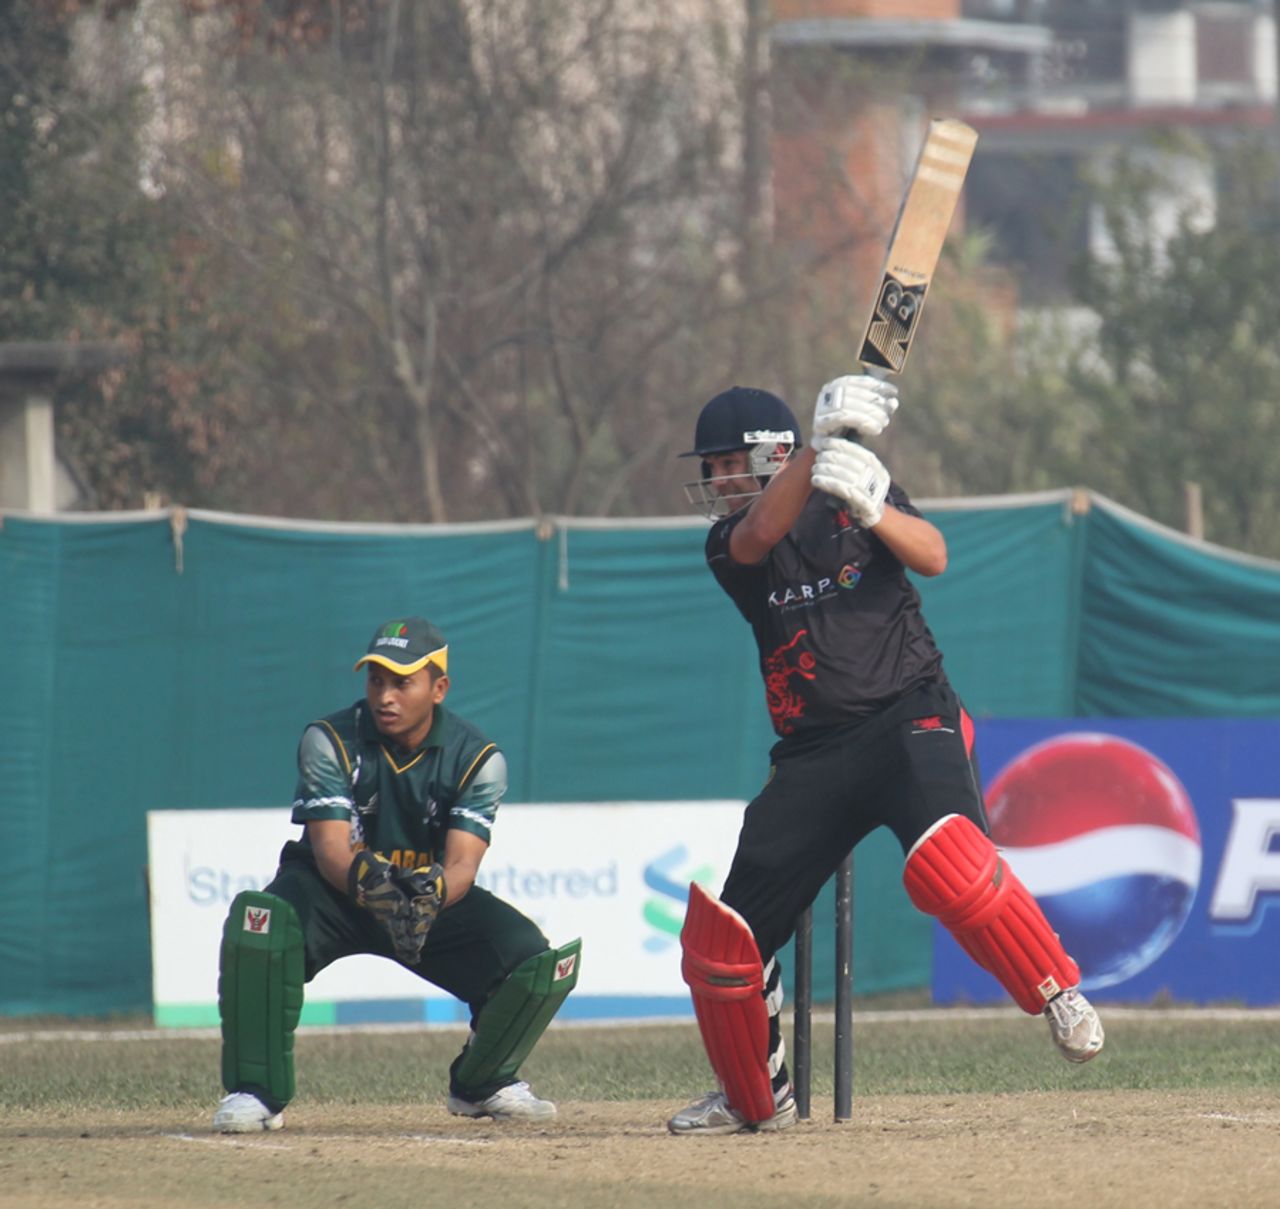 Courtney Kruger cuts the ball away during his innings of 38 against Saudi Arabia at the ACC Twenty20 Cup 2011 in Kathmandu on 5th December 2011